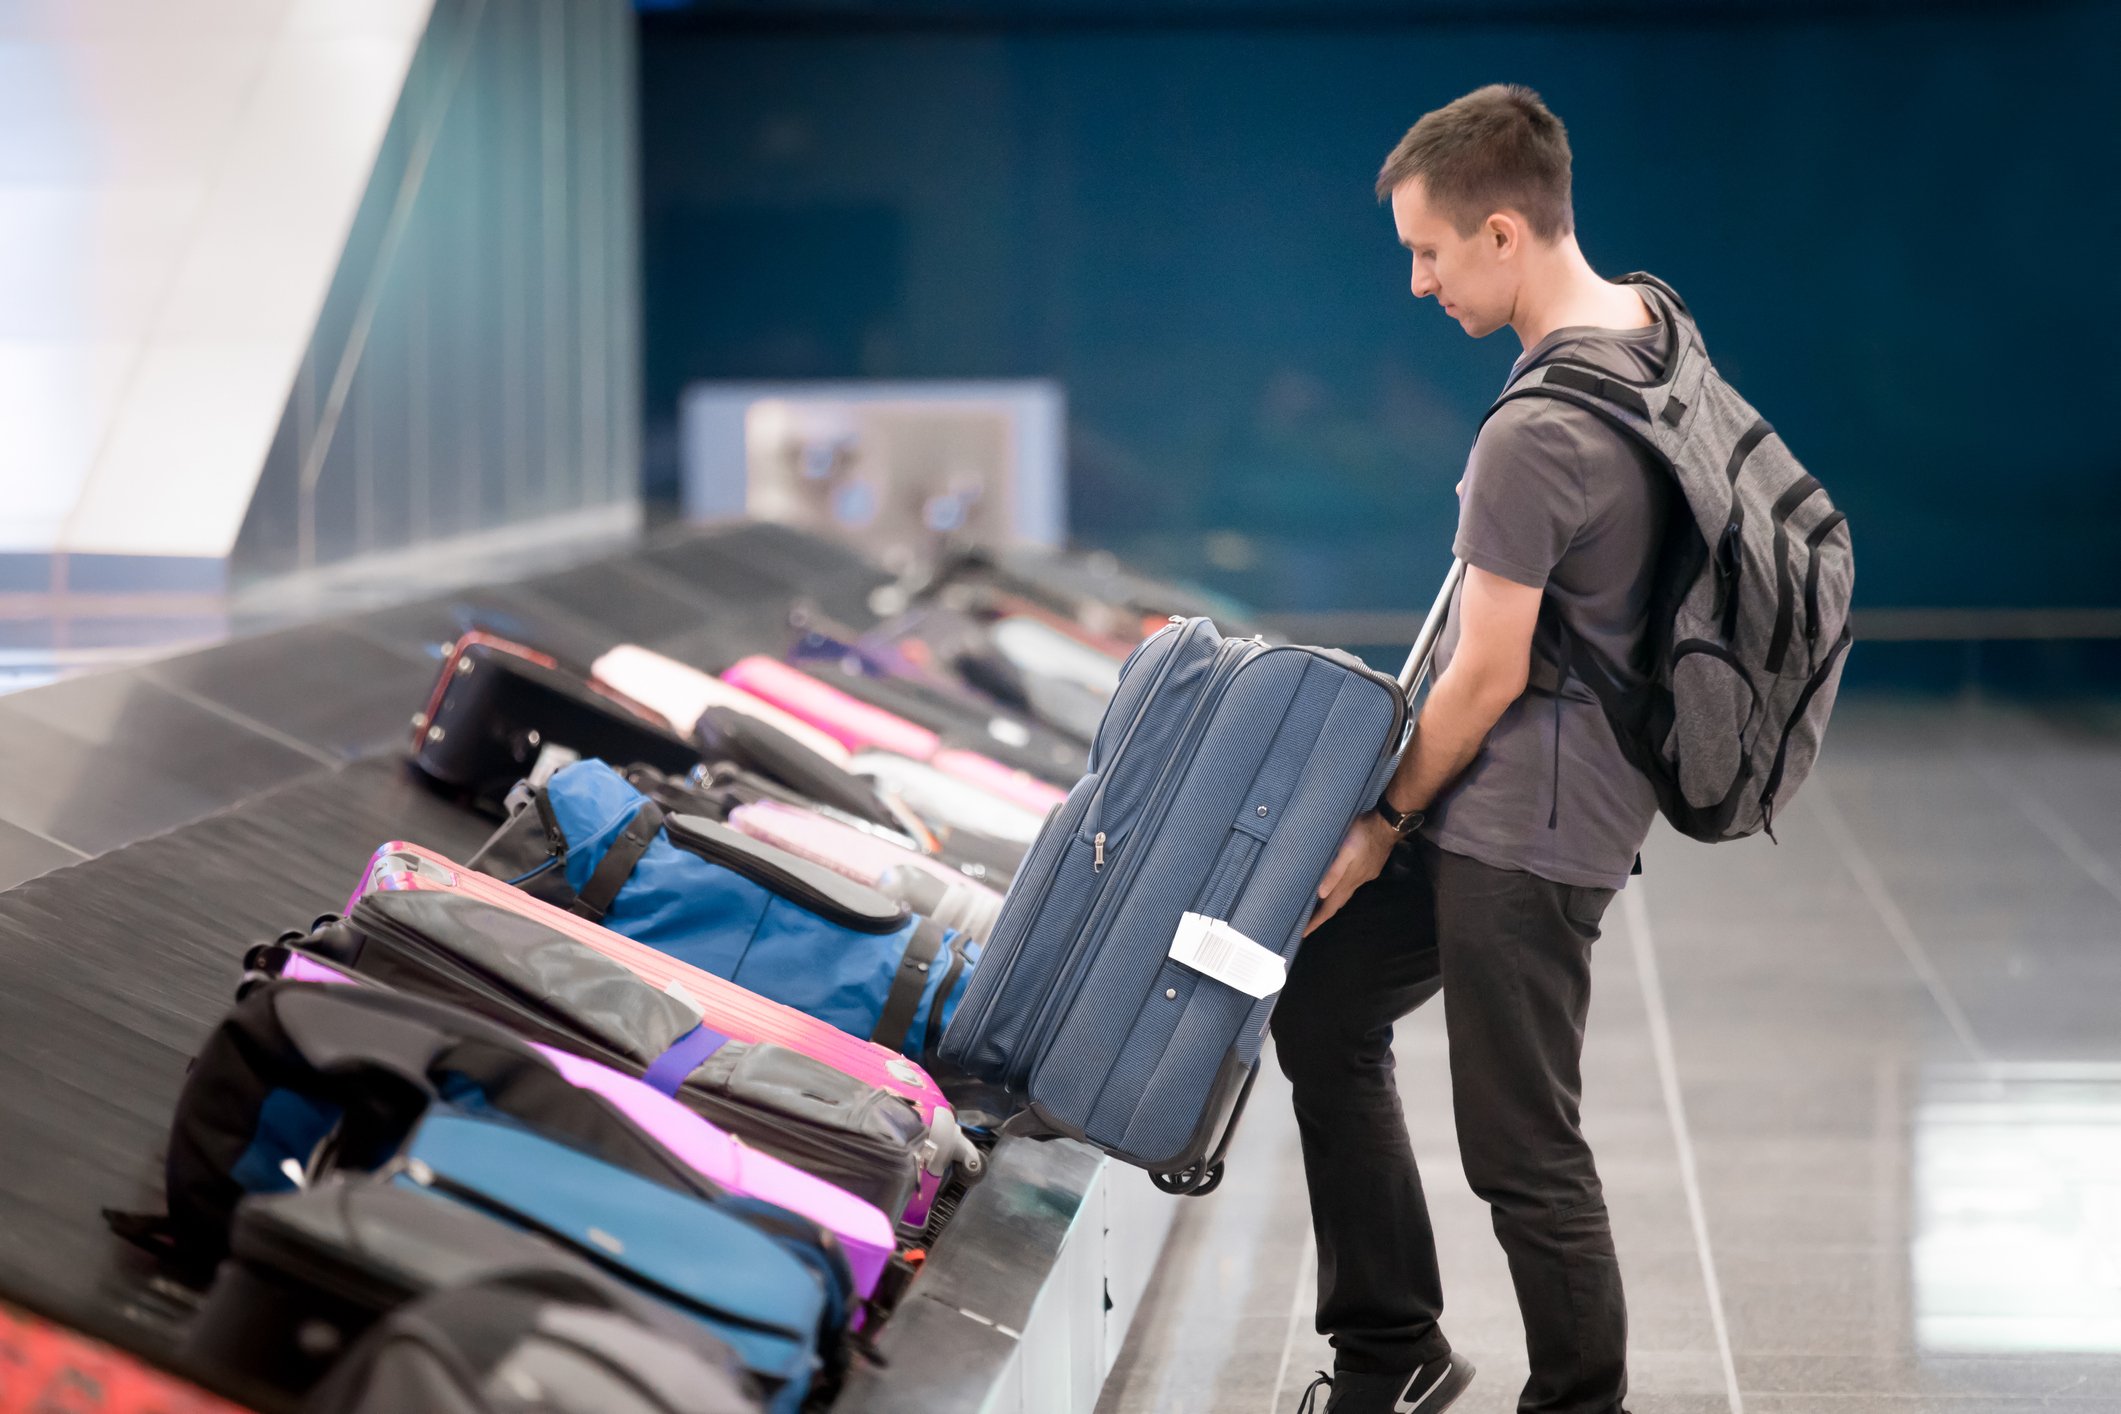 The Ultimate Guide to Shipping Luggage: Cost, Tips, and Tricks - Shipping Luggage vs. Checking Luggage